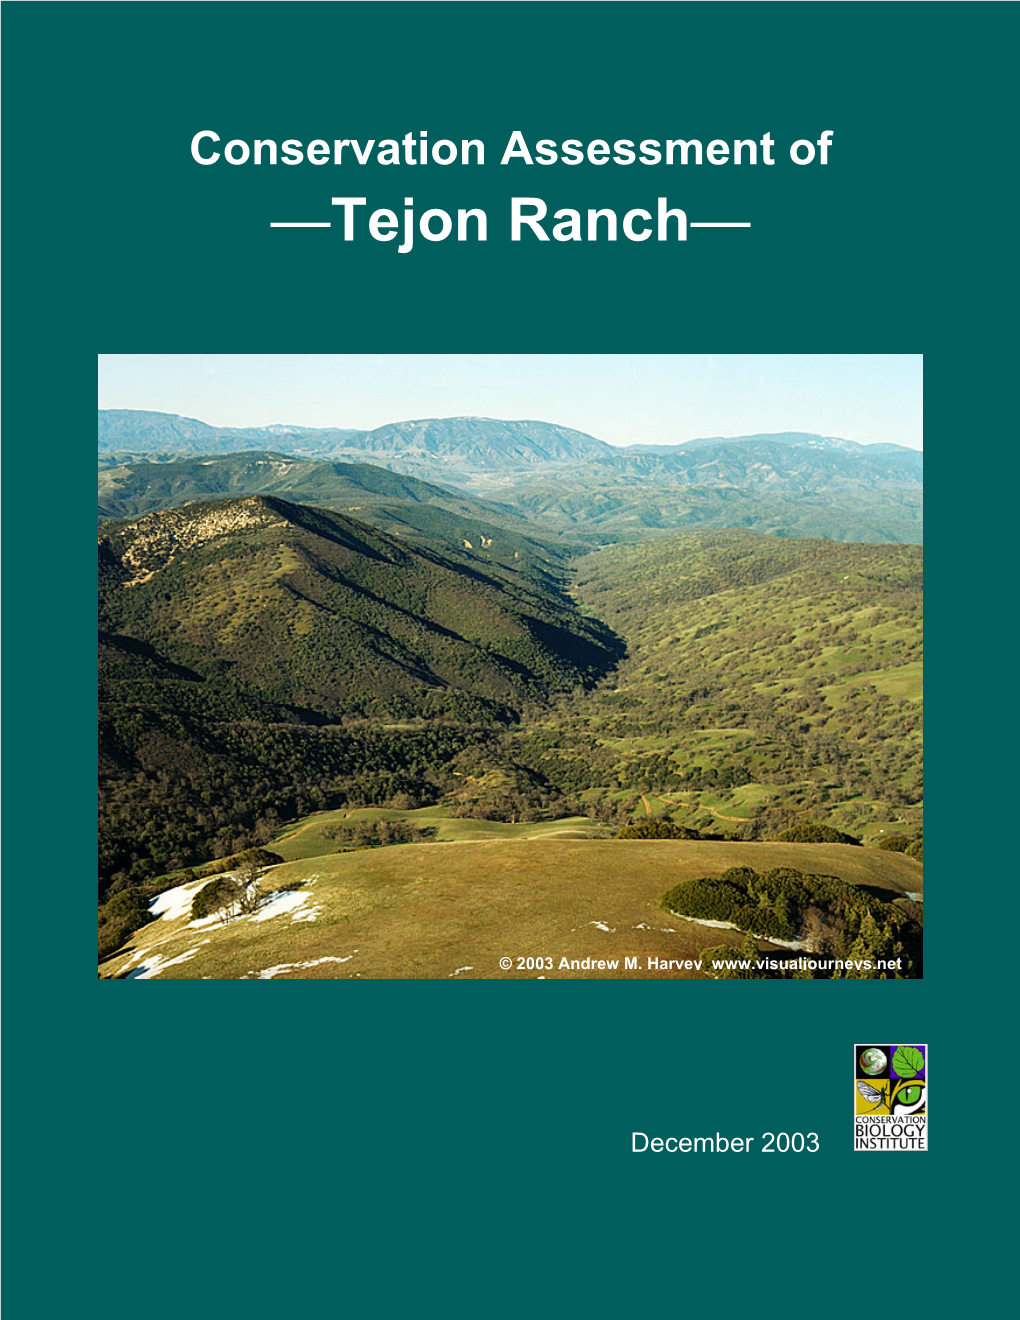 Conservation Assessment of —Tejon Ranch—